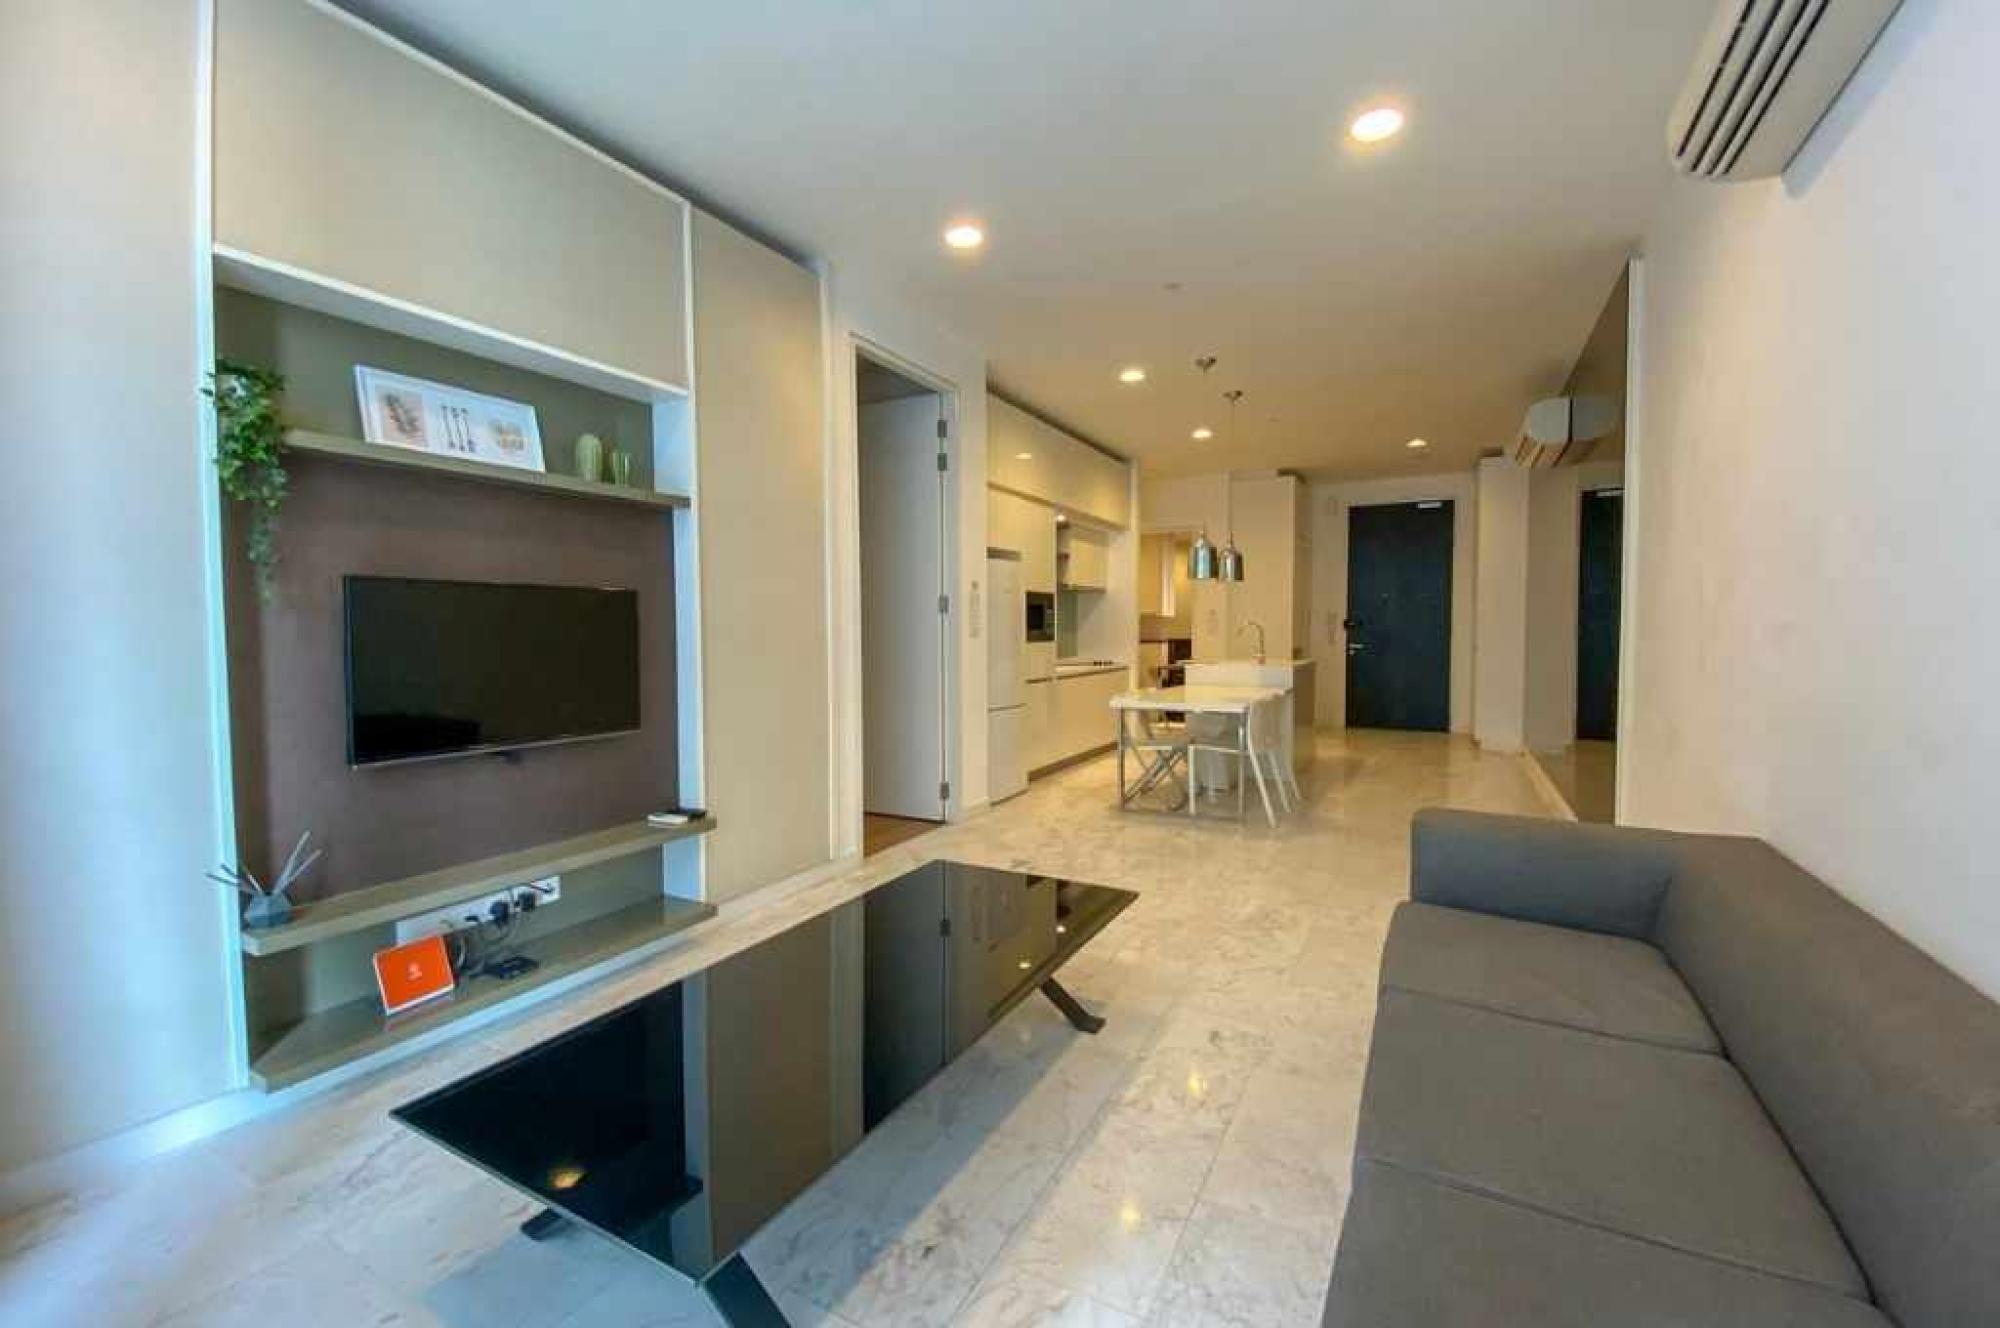 Property Image 1 - Sophisticated 2 Bedroom Apartment in the Centre of Kuala Lumpur